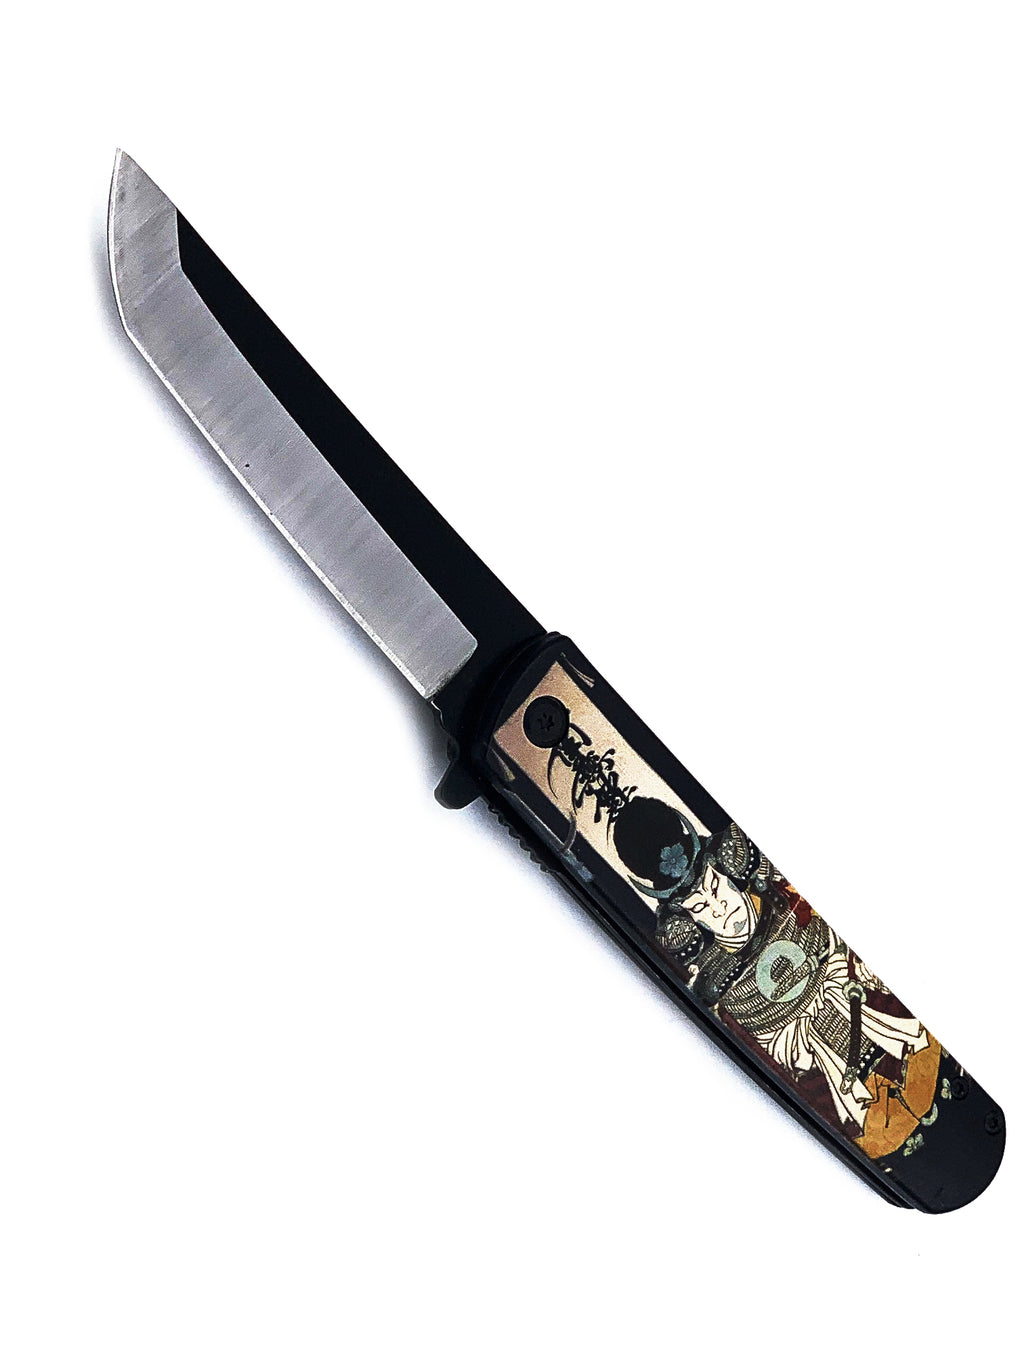 Kabuto Samurai Spring Assisted Pocket Knife with Two Tone Rounded Tanto Blade